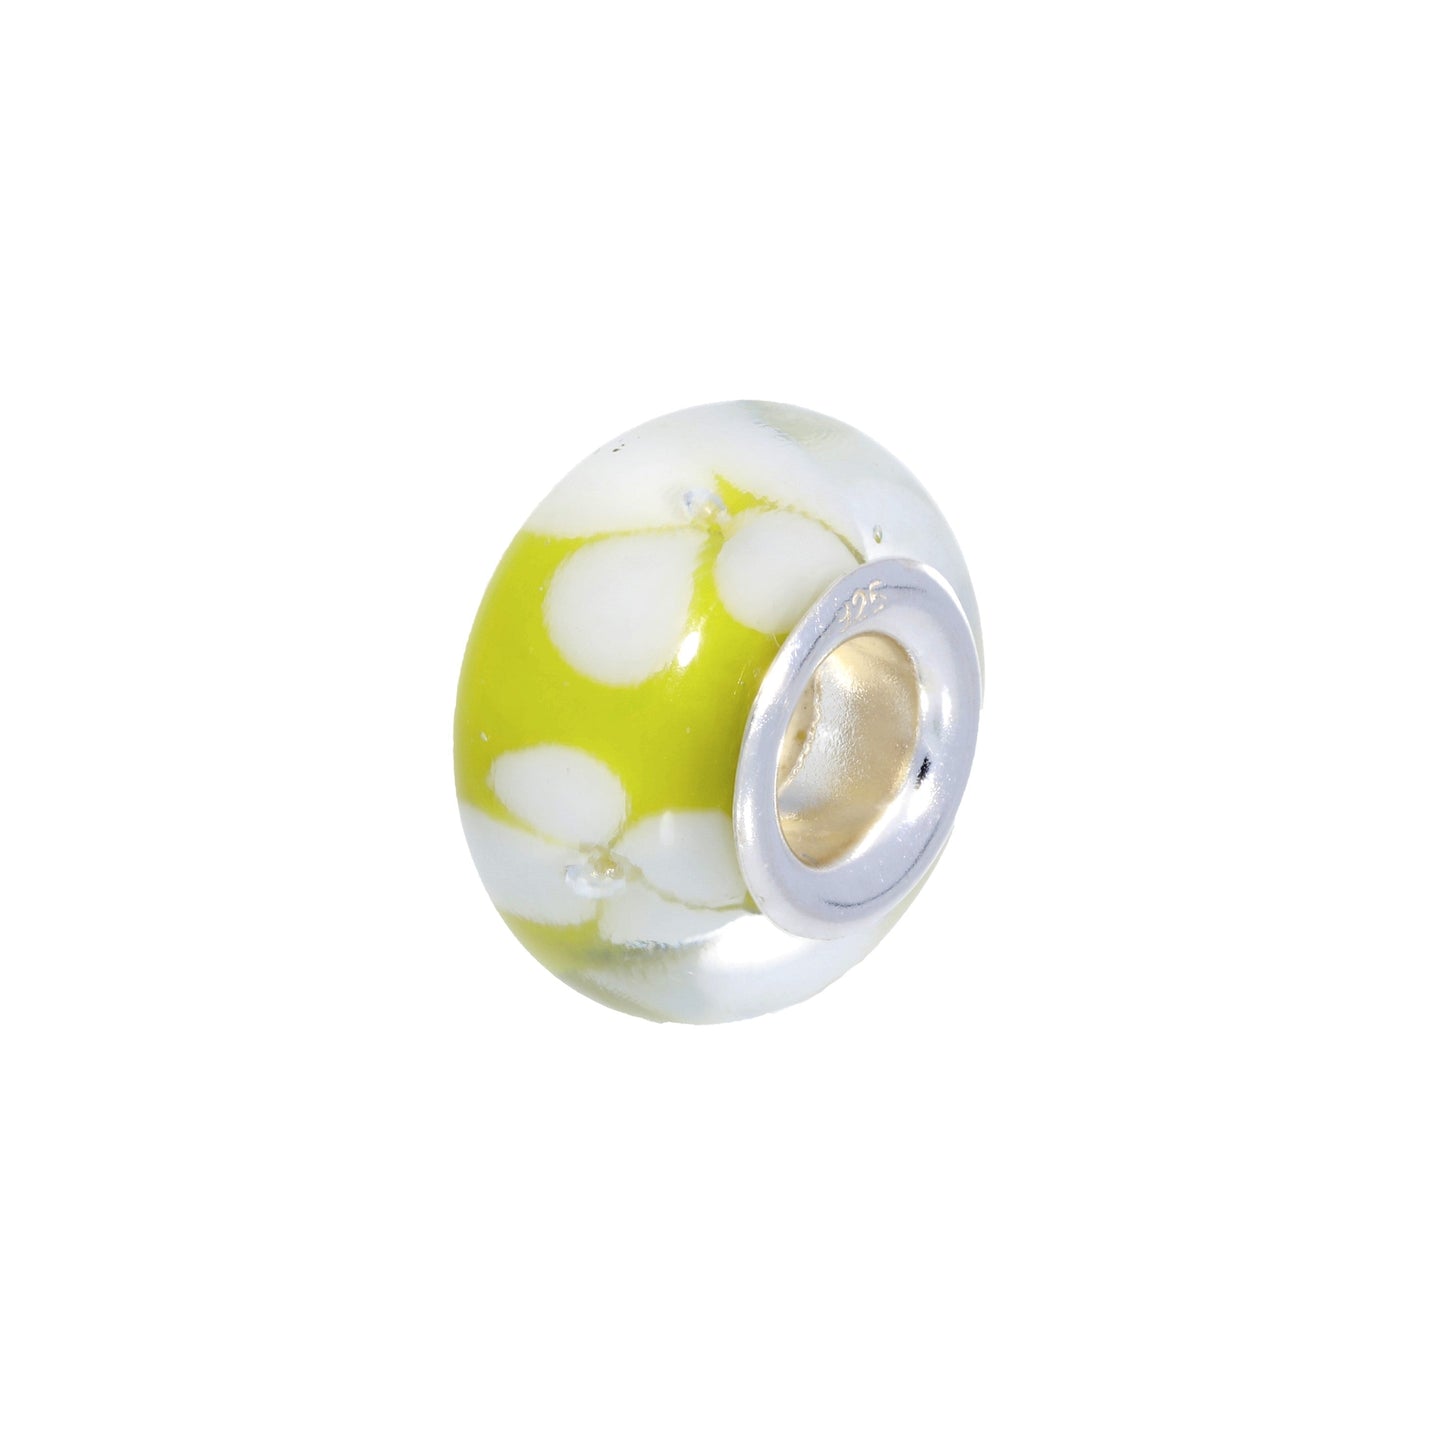 Sterling Silver & Yellow Glass Bead Charm with White Flowers